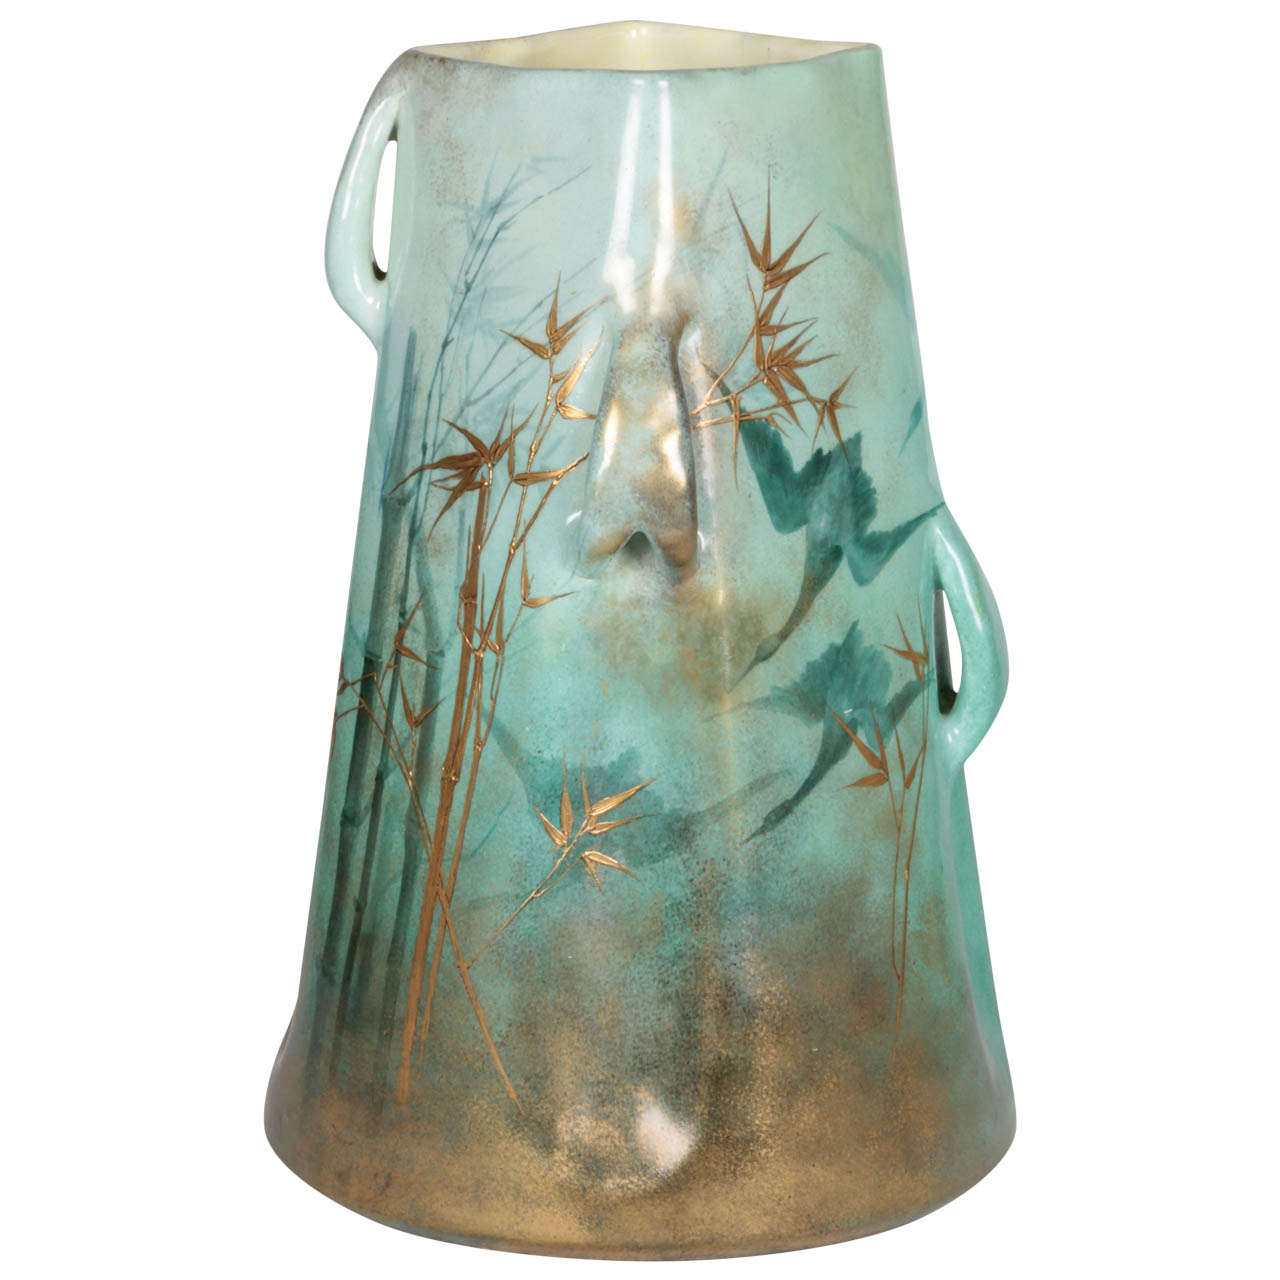 Clement Massier / French Art Nouveau "Bamboo and Flying Crane" Vase circa 1900 For Sale